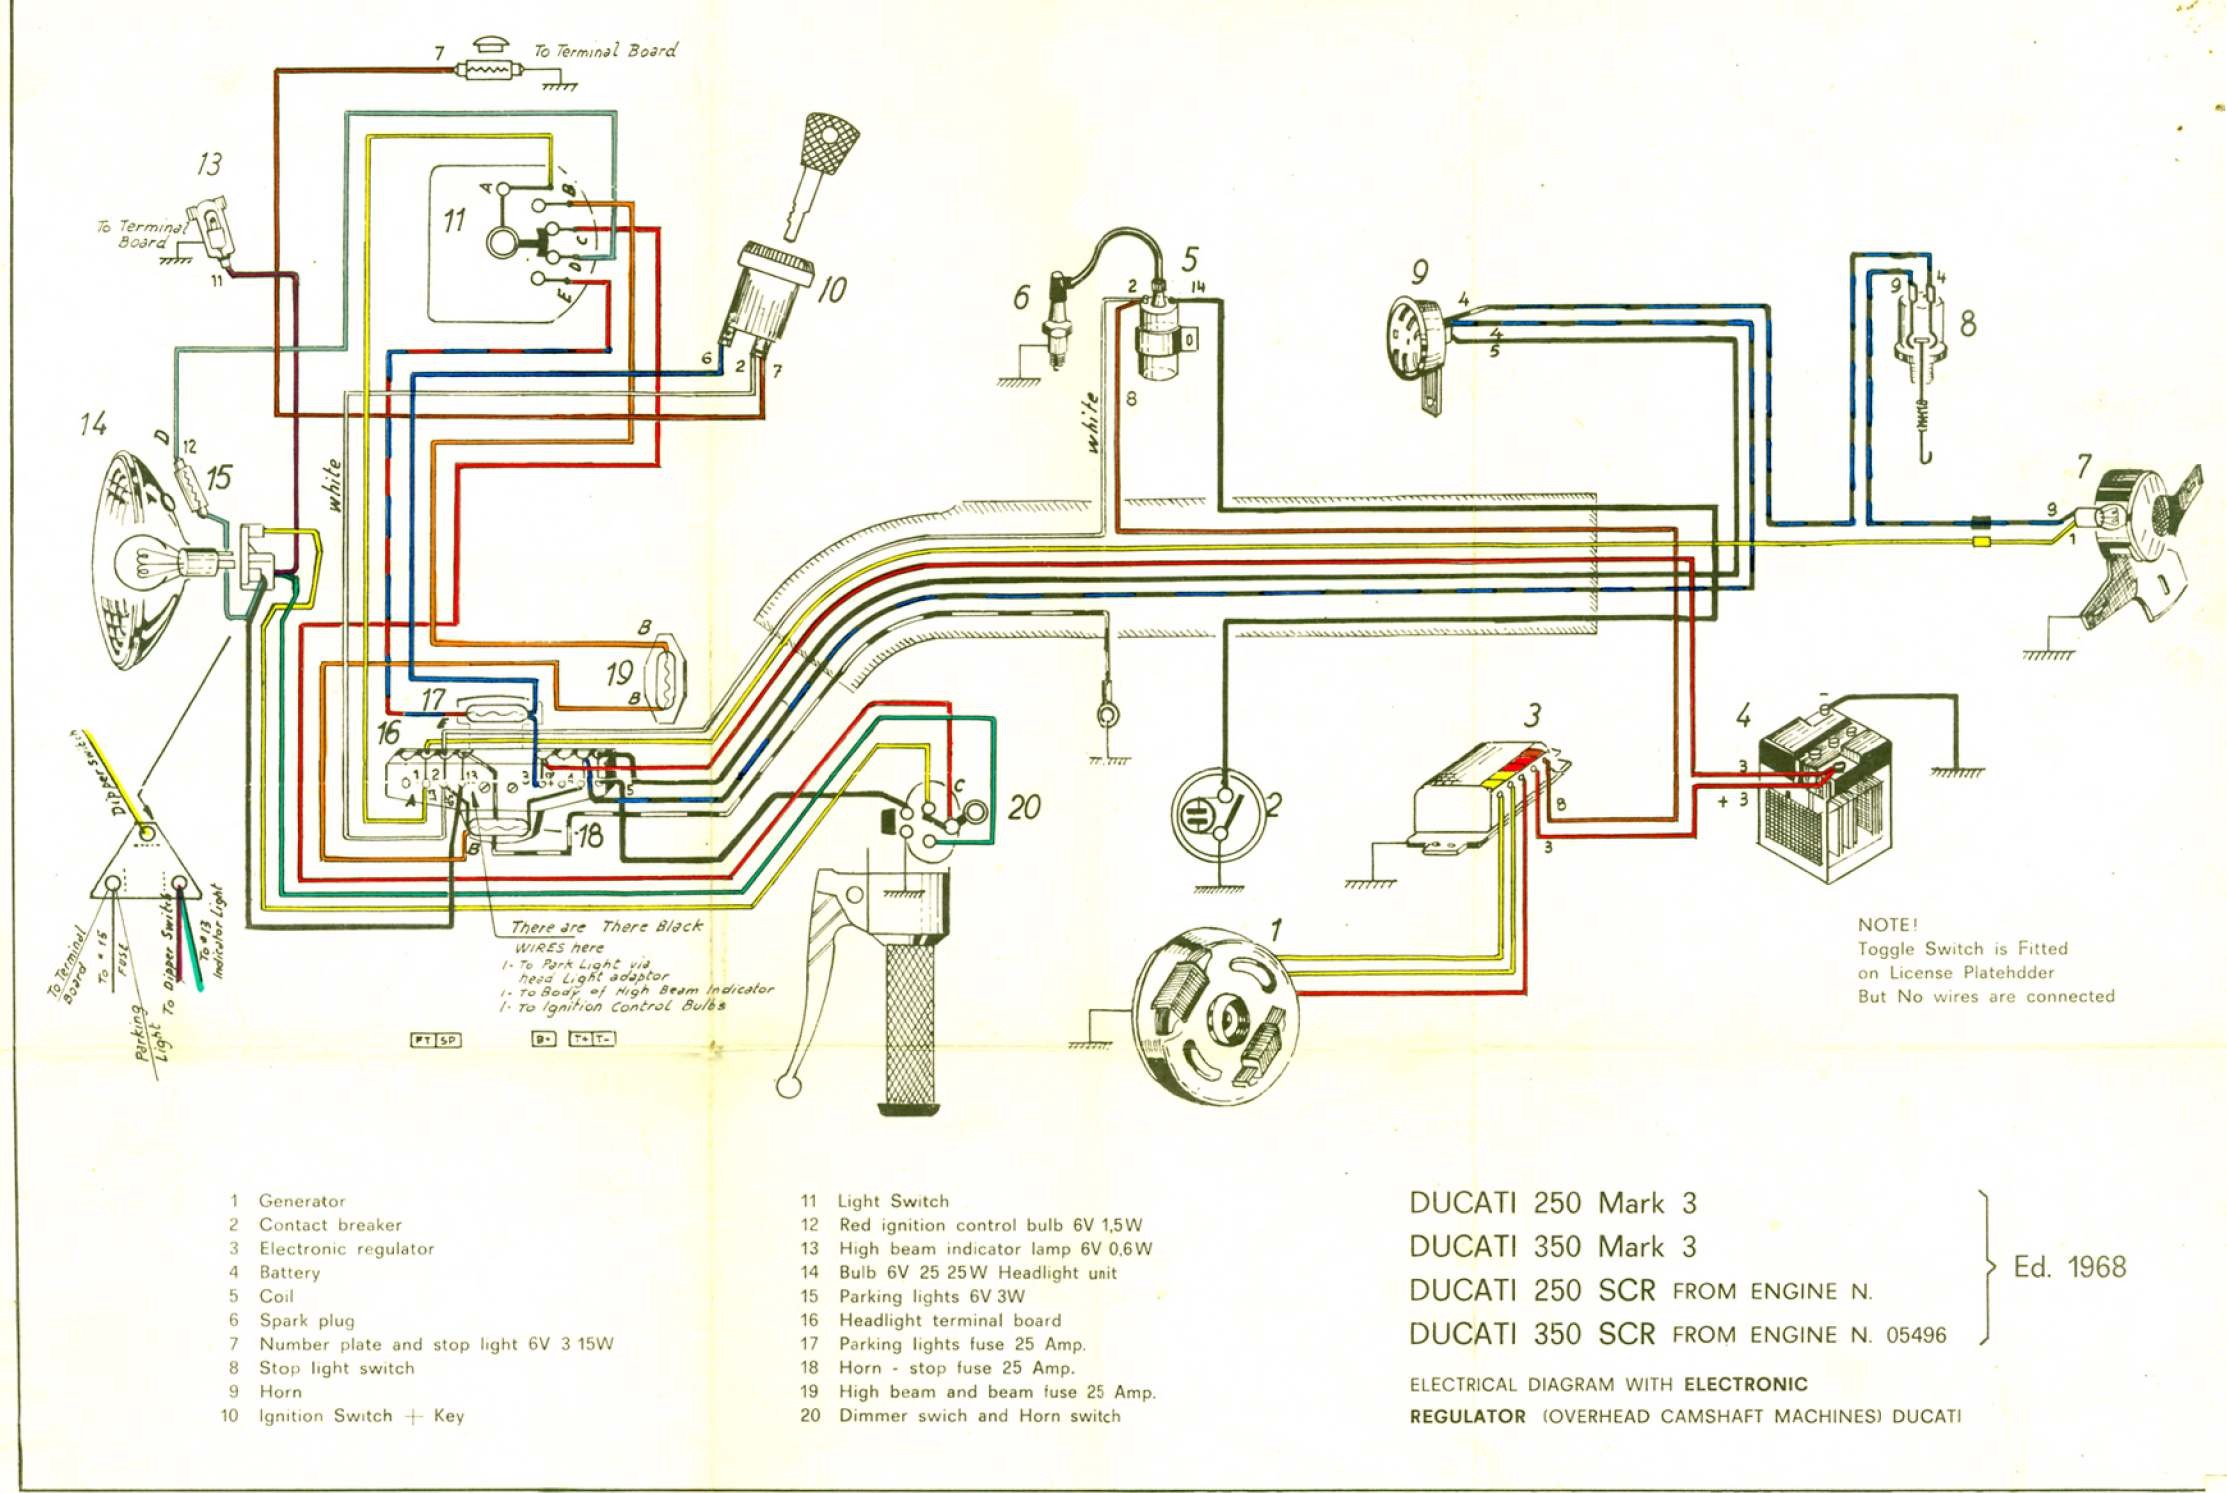 Royal Enfield Engine Diagram Dan S Motorcycle "various Wiring Systems and Diagrams" Of Royal Enfield Engine Diagram